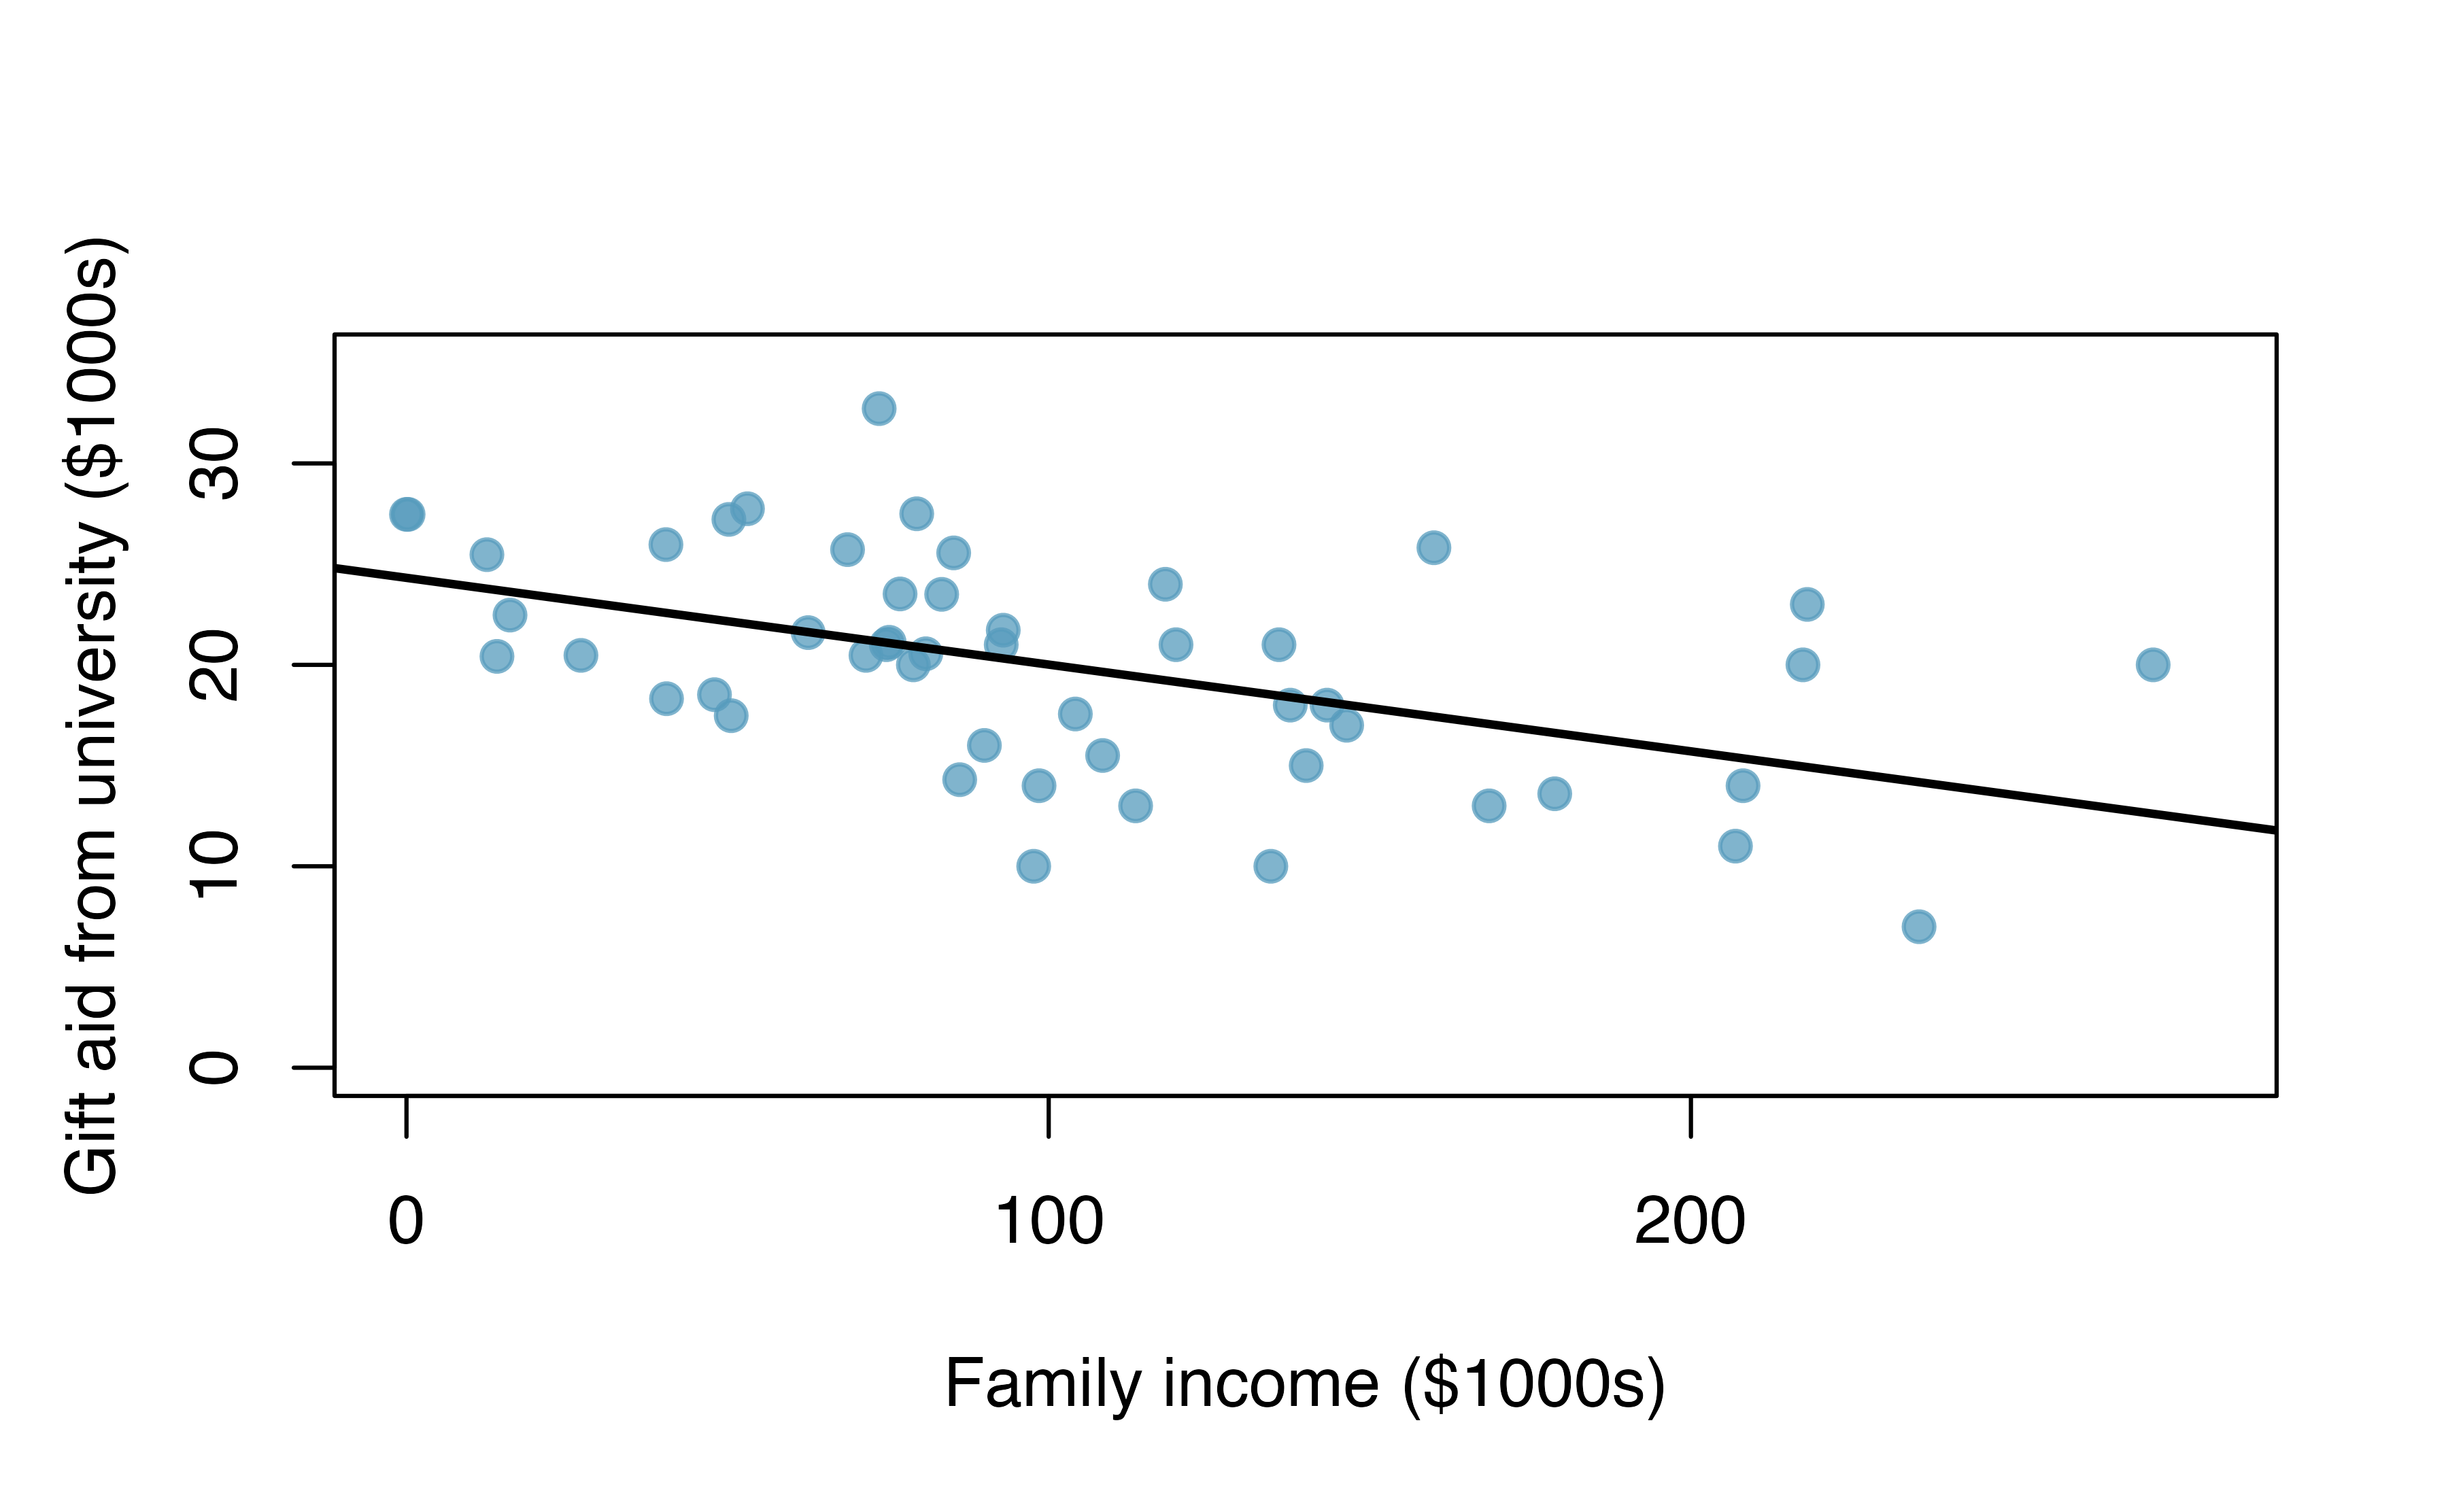 Gift aid and family income for a random sample of 50 first-year students from Elmhurst College, shown with a regression line.